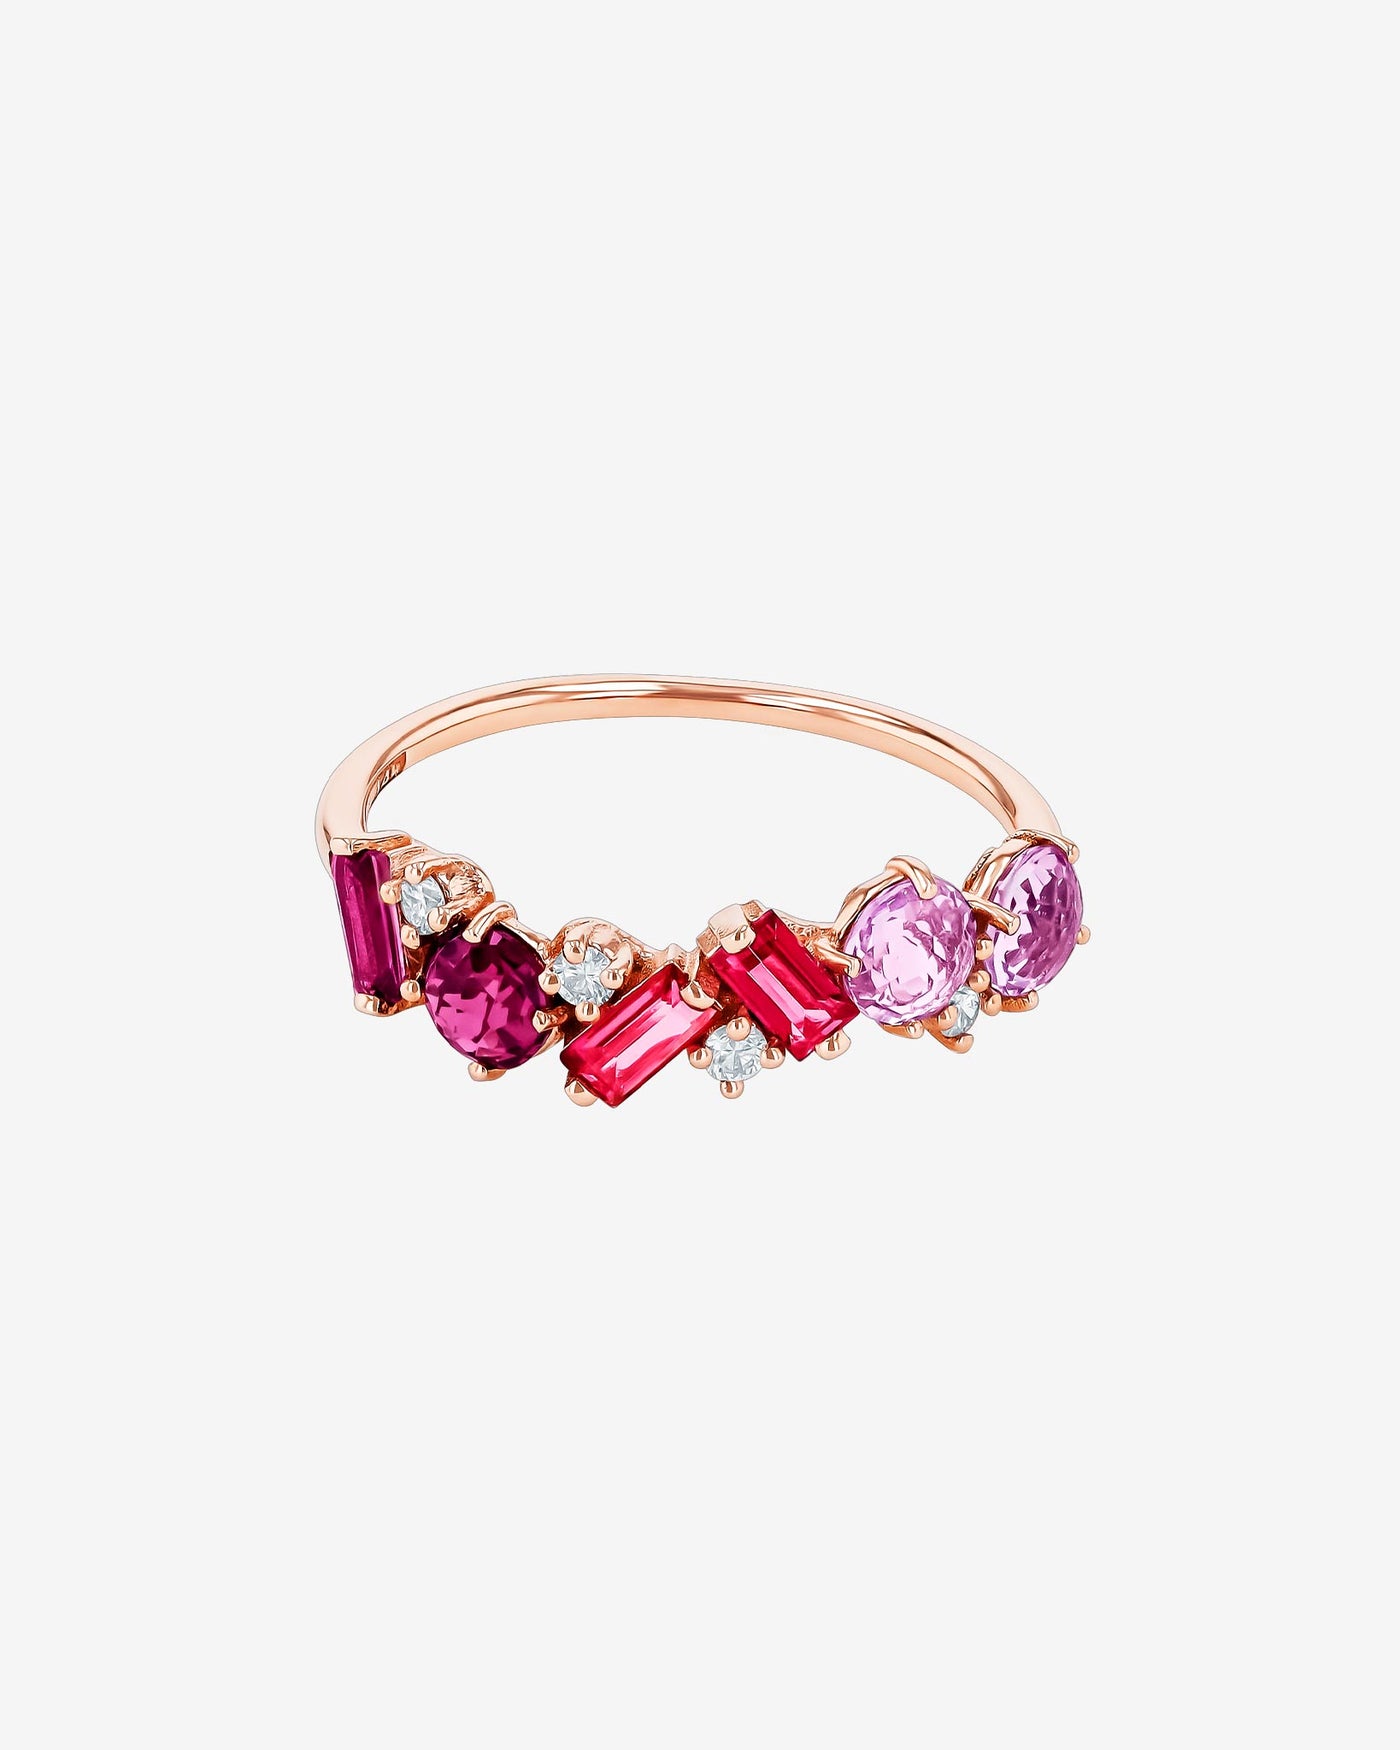 Shop Rings for Women and Girls Online | Suzanne Kalan® – Page 6